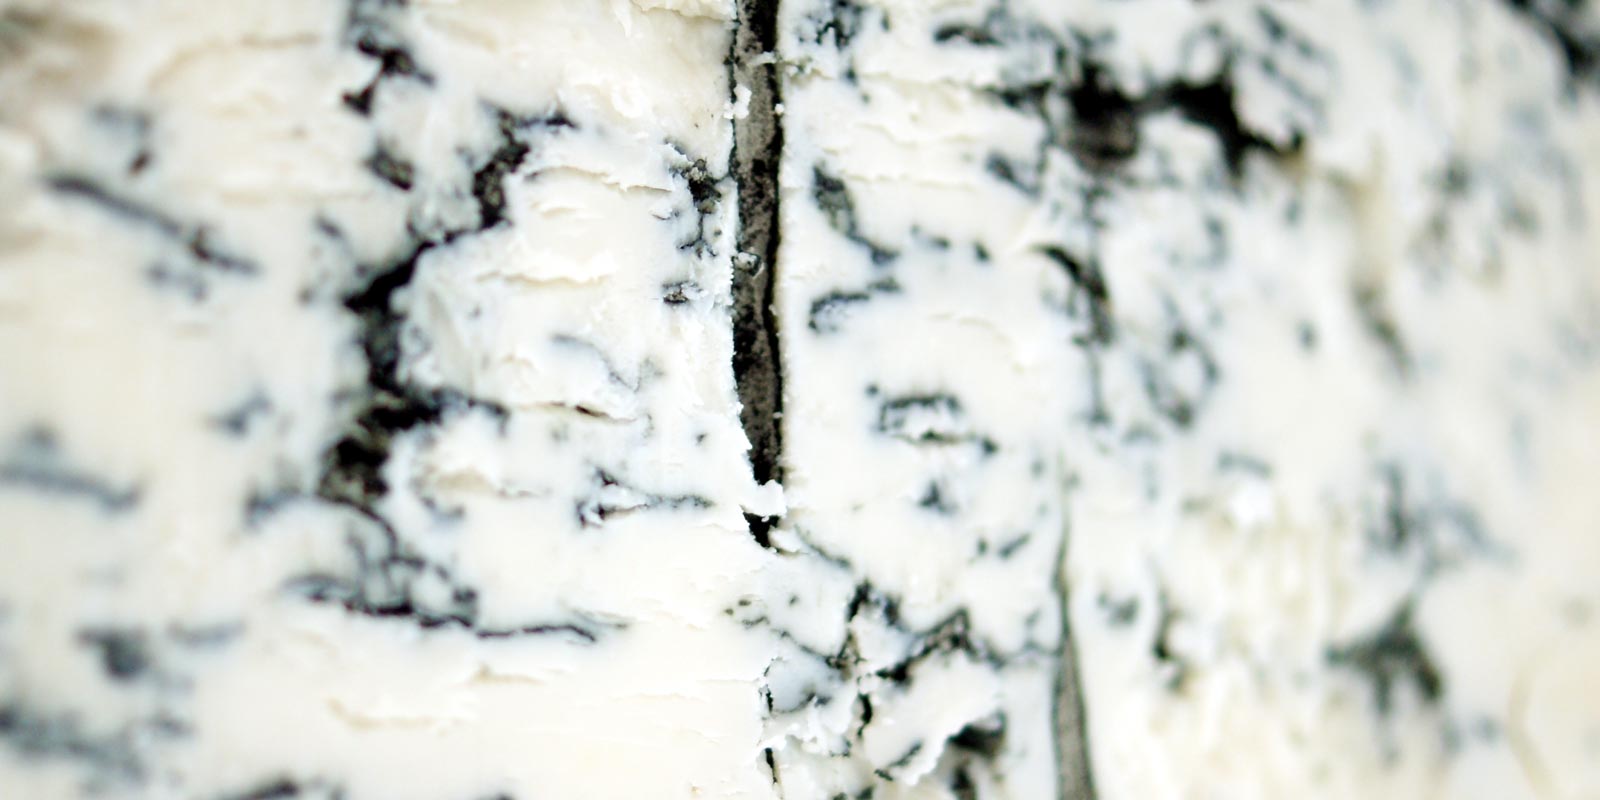 Soft cheese, buffalo ricotta, semi-hard cheese Here you will find different types of soft cheese. Whether delicious buffalo milk ricotta or long-matured blue cheese. Your taste buds will be happy here.